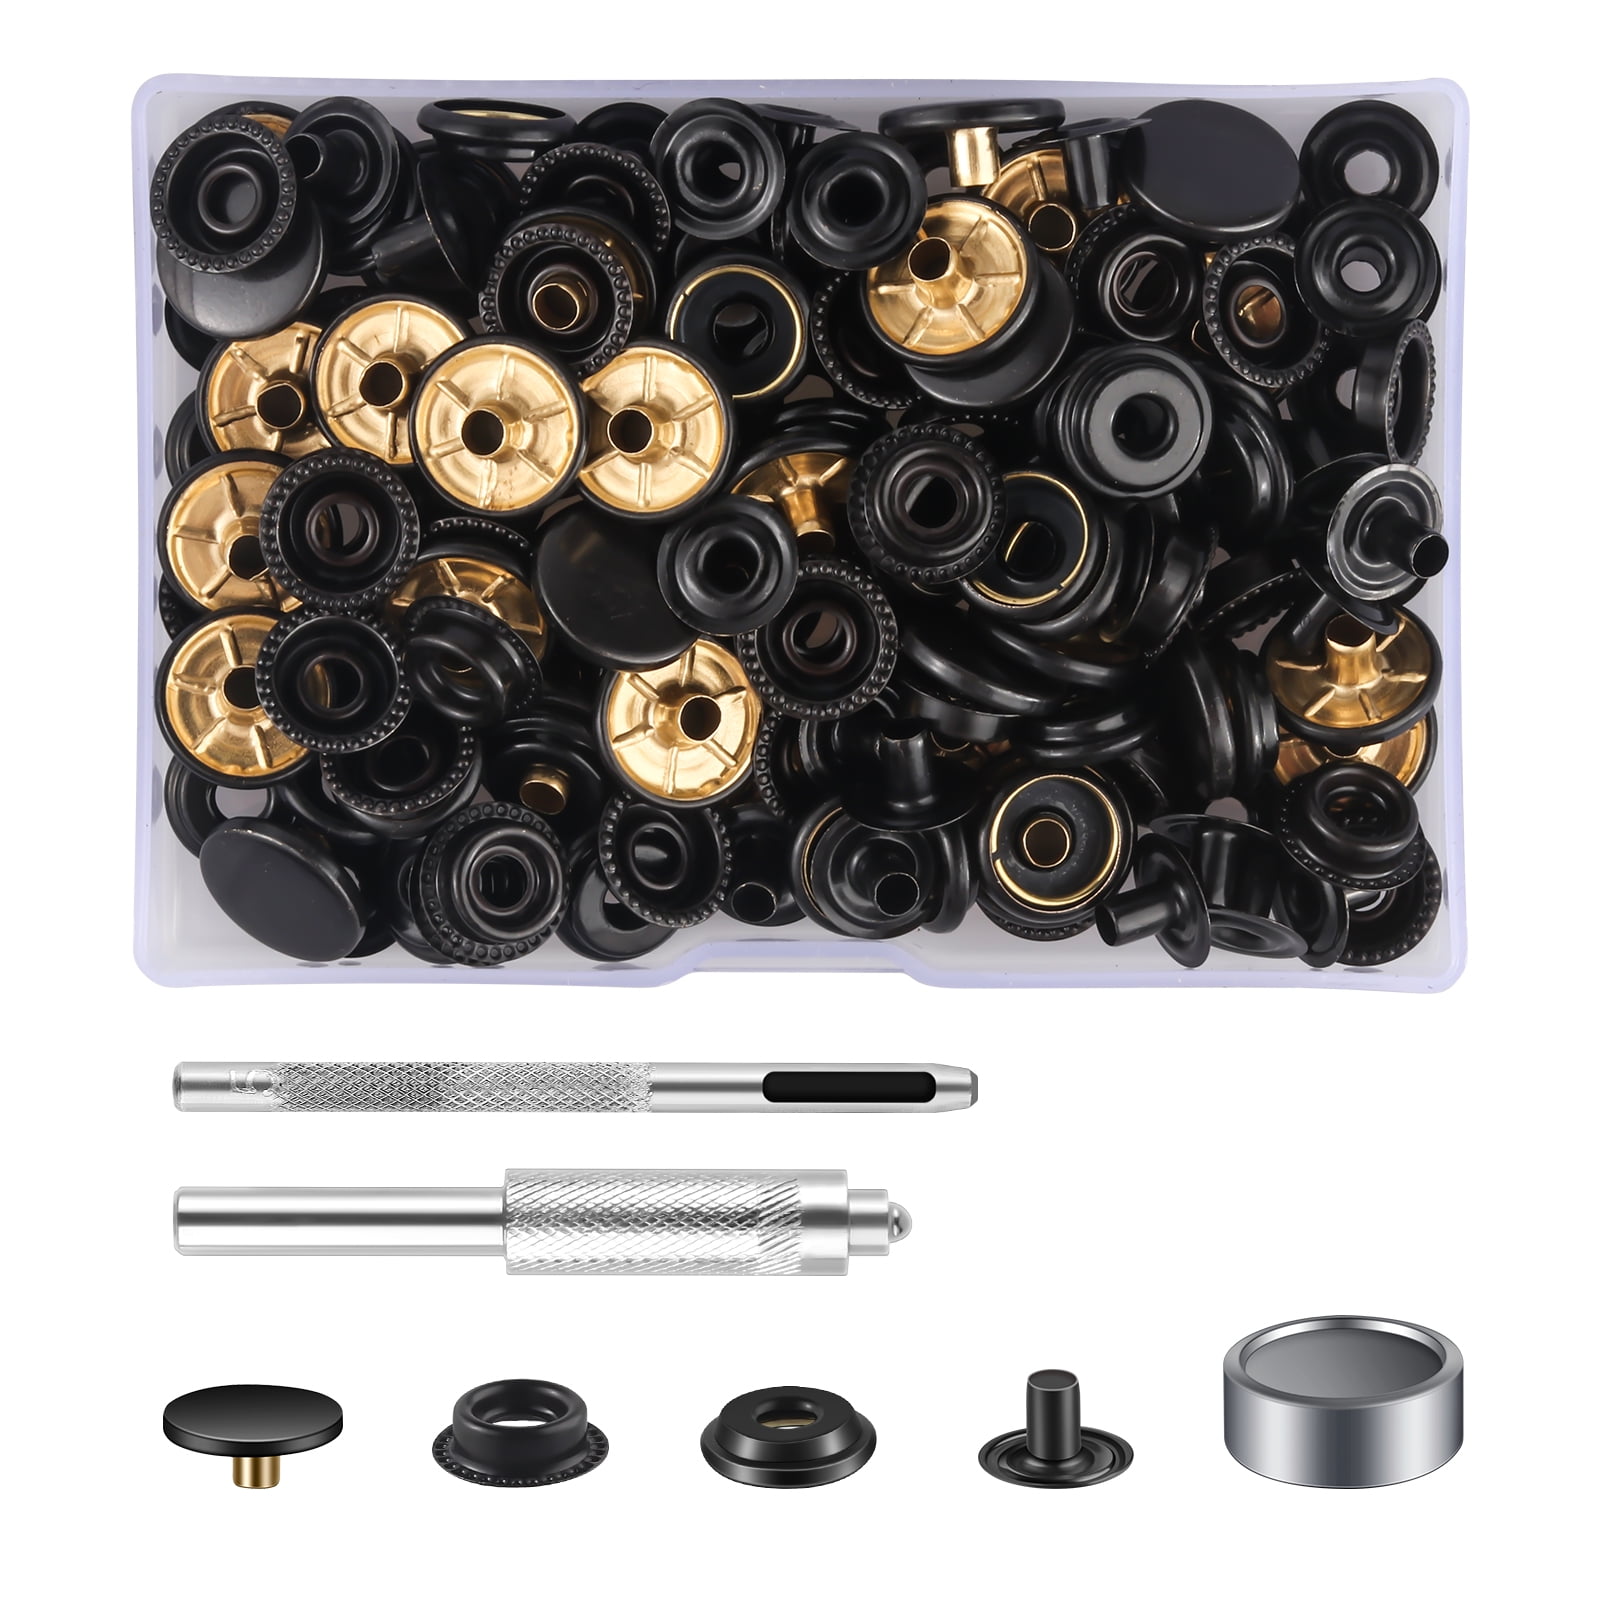 MSDADA 32 Sets Press Studs Cap Button, Stainless Steel Snap Fasteners Kit with Hand Fixing Tools, Instant Metal Buttons No-Sew Clips Snap for Bags, Jeans